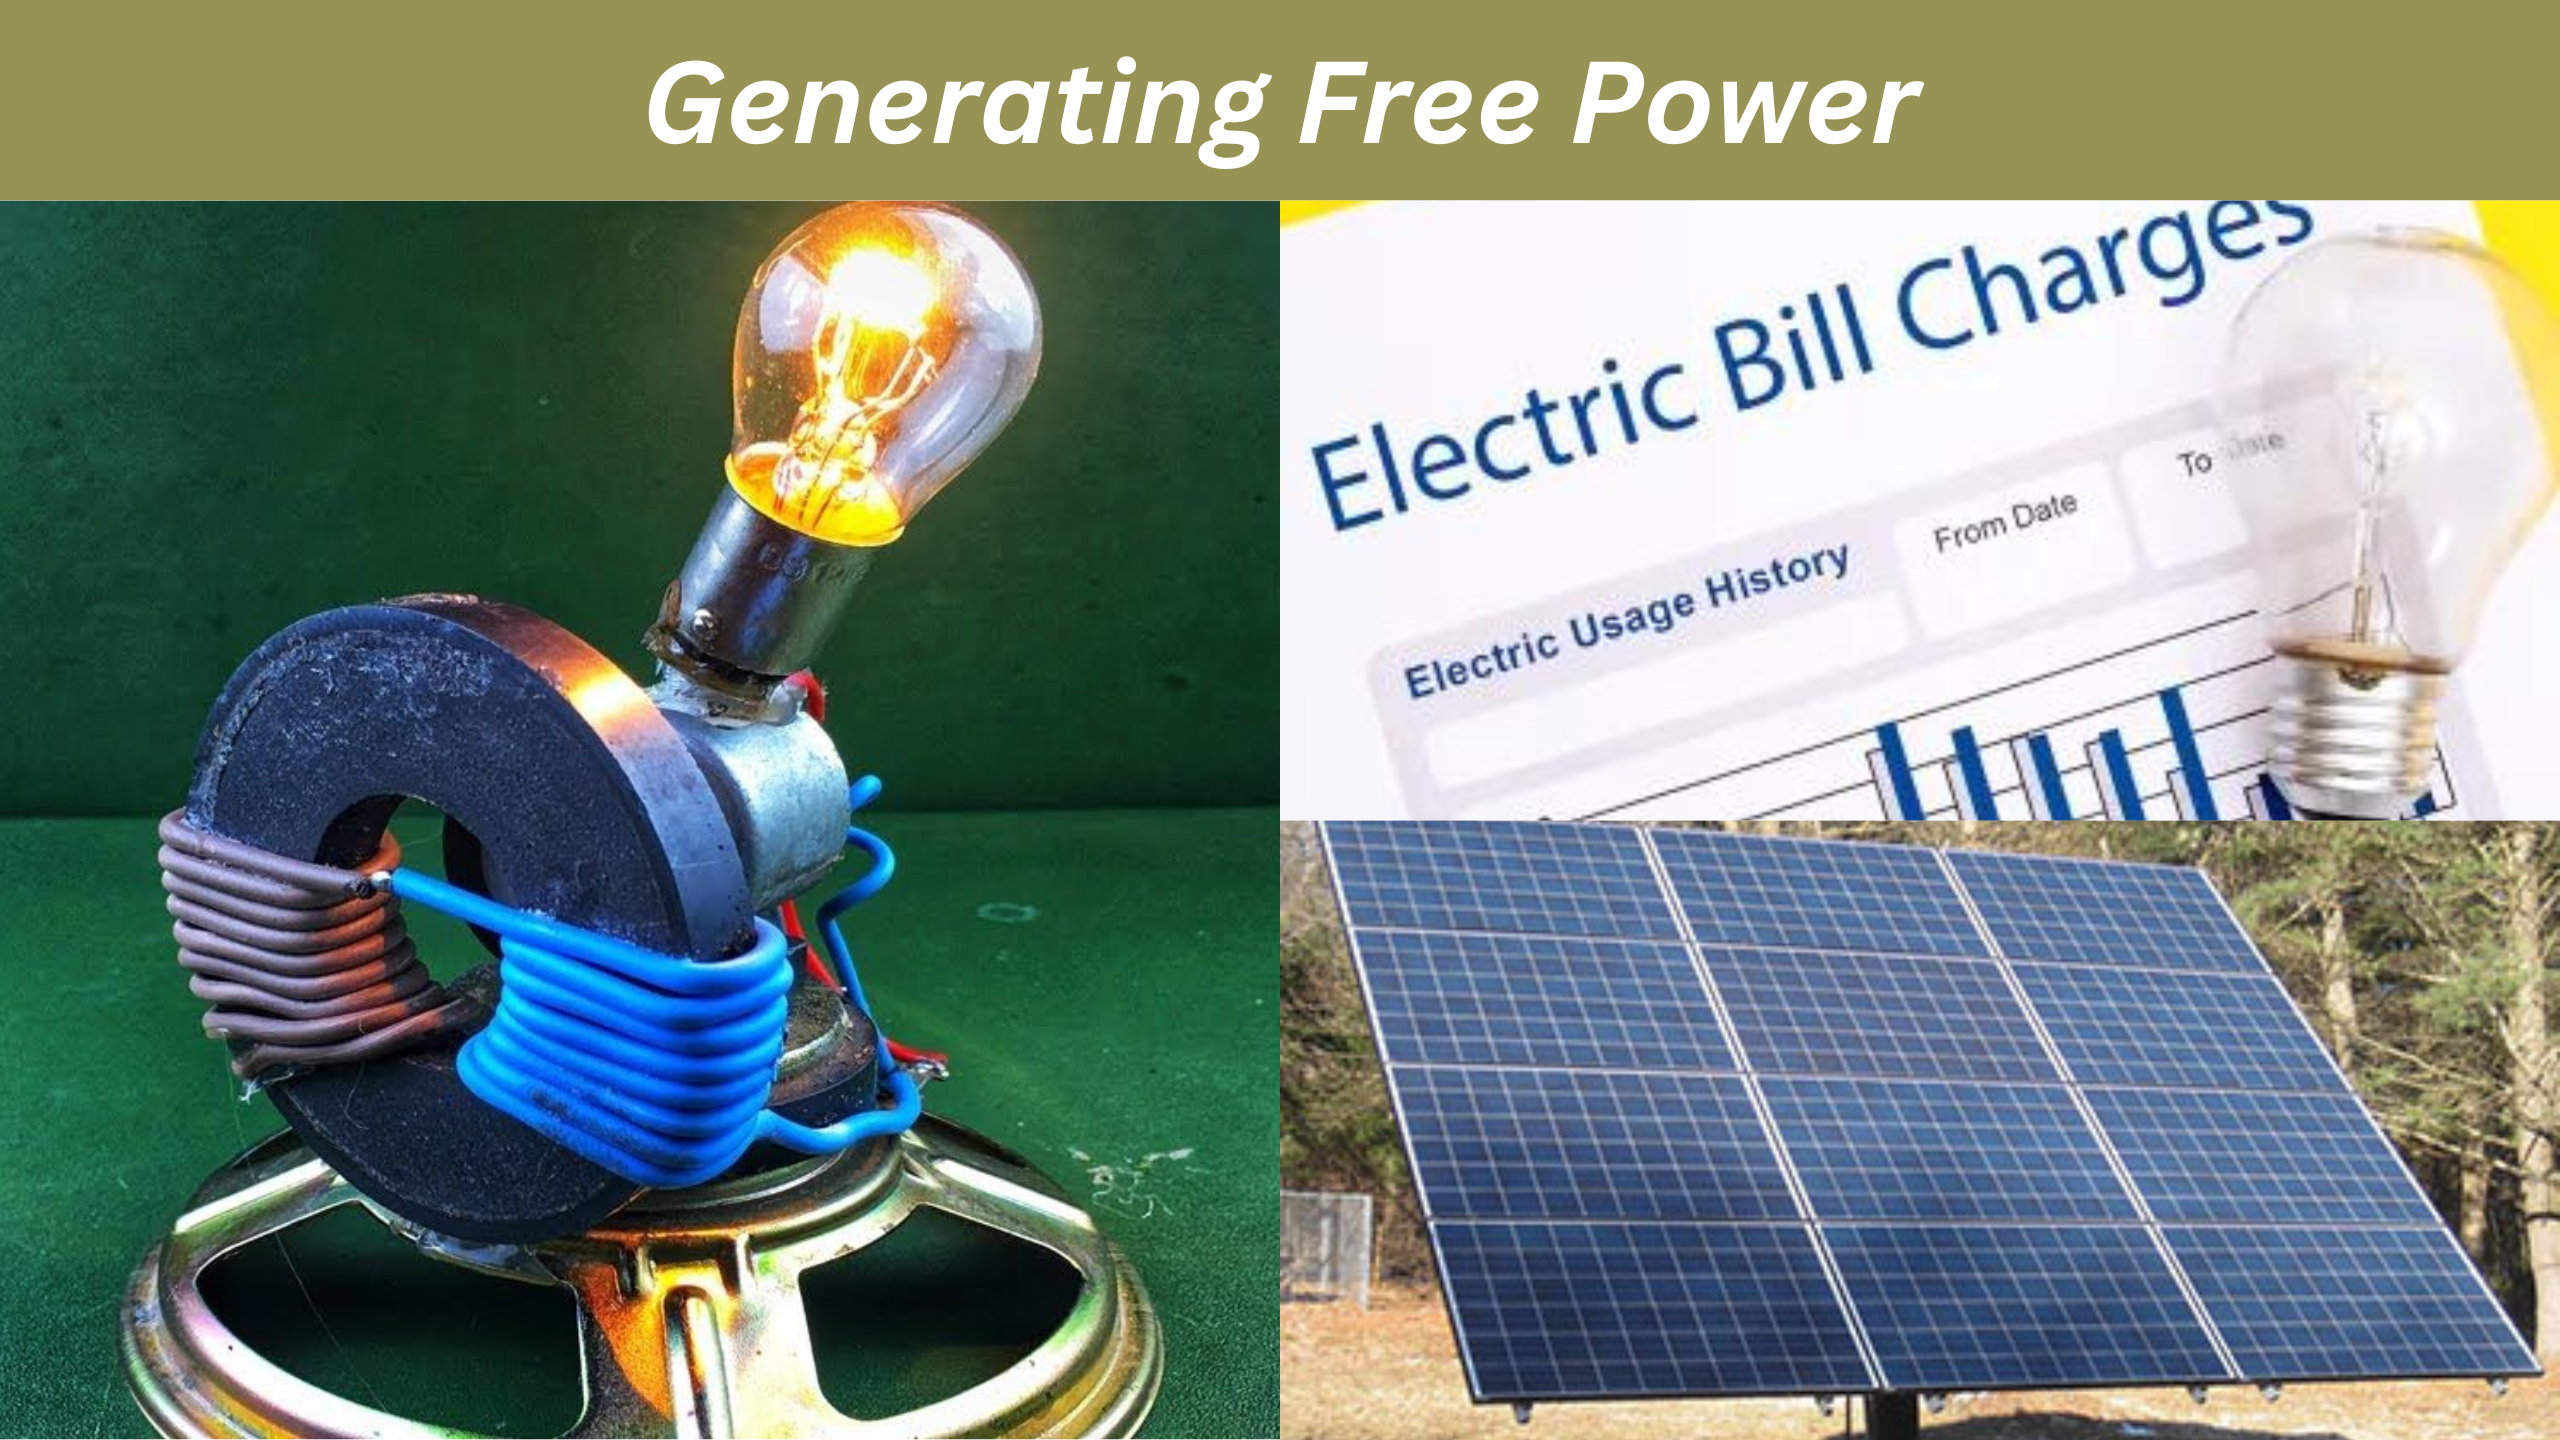 Generating Free Power: Harnessing the Energy of the Future